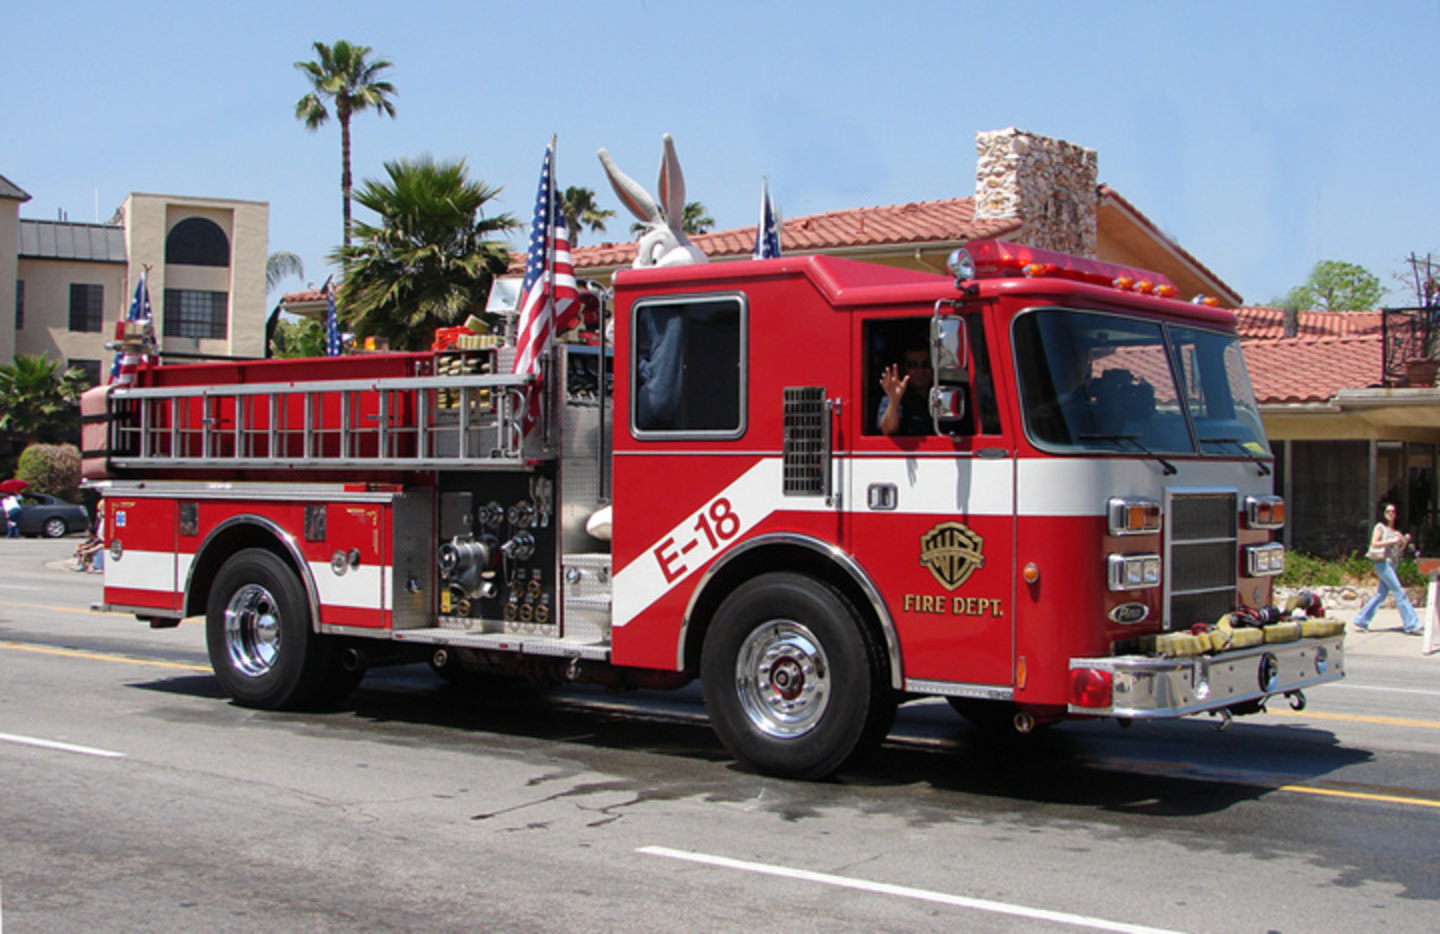 Pierce FireRescue Pumper Photo Gallery: Photo #09 out of 9, Image ...